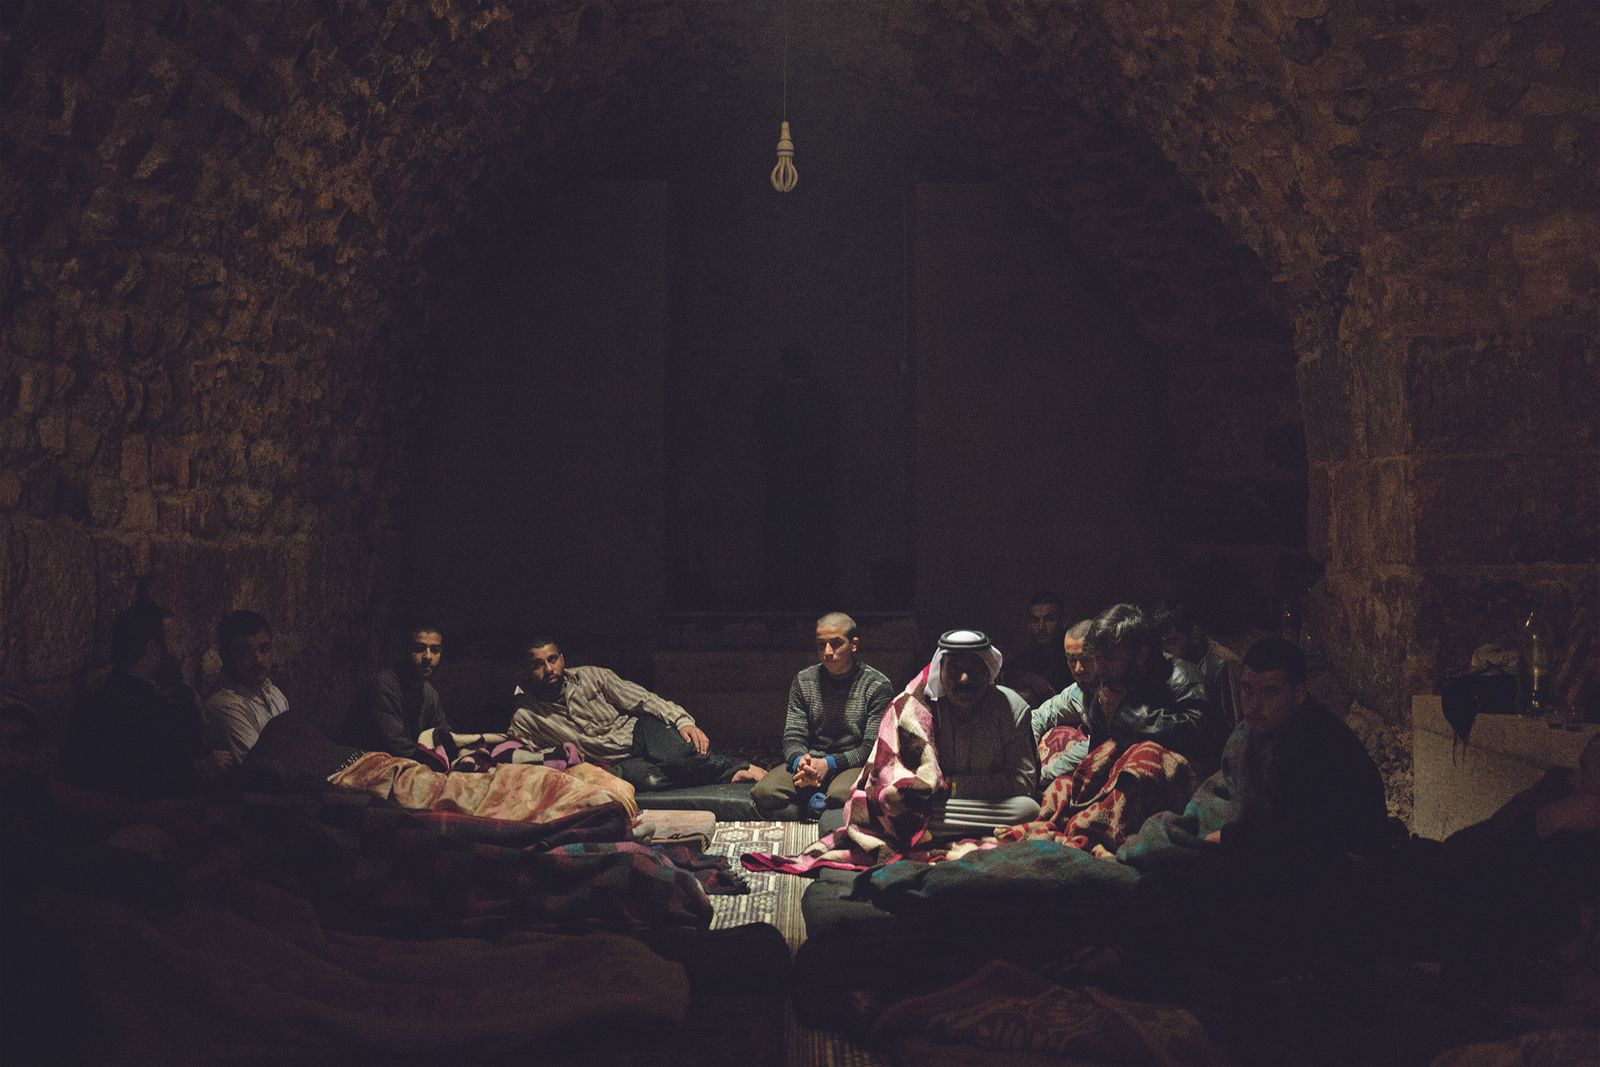 Photobook Review: Documenting the Complexities and Horrors of Syria’s Raging War